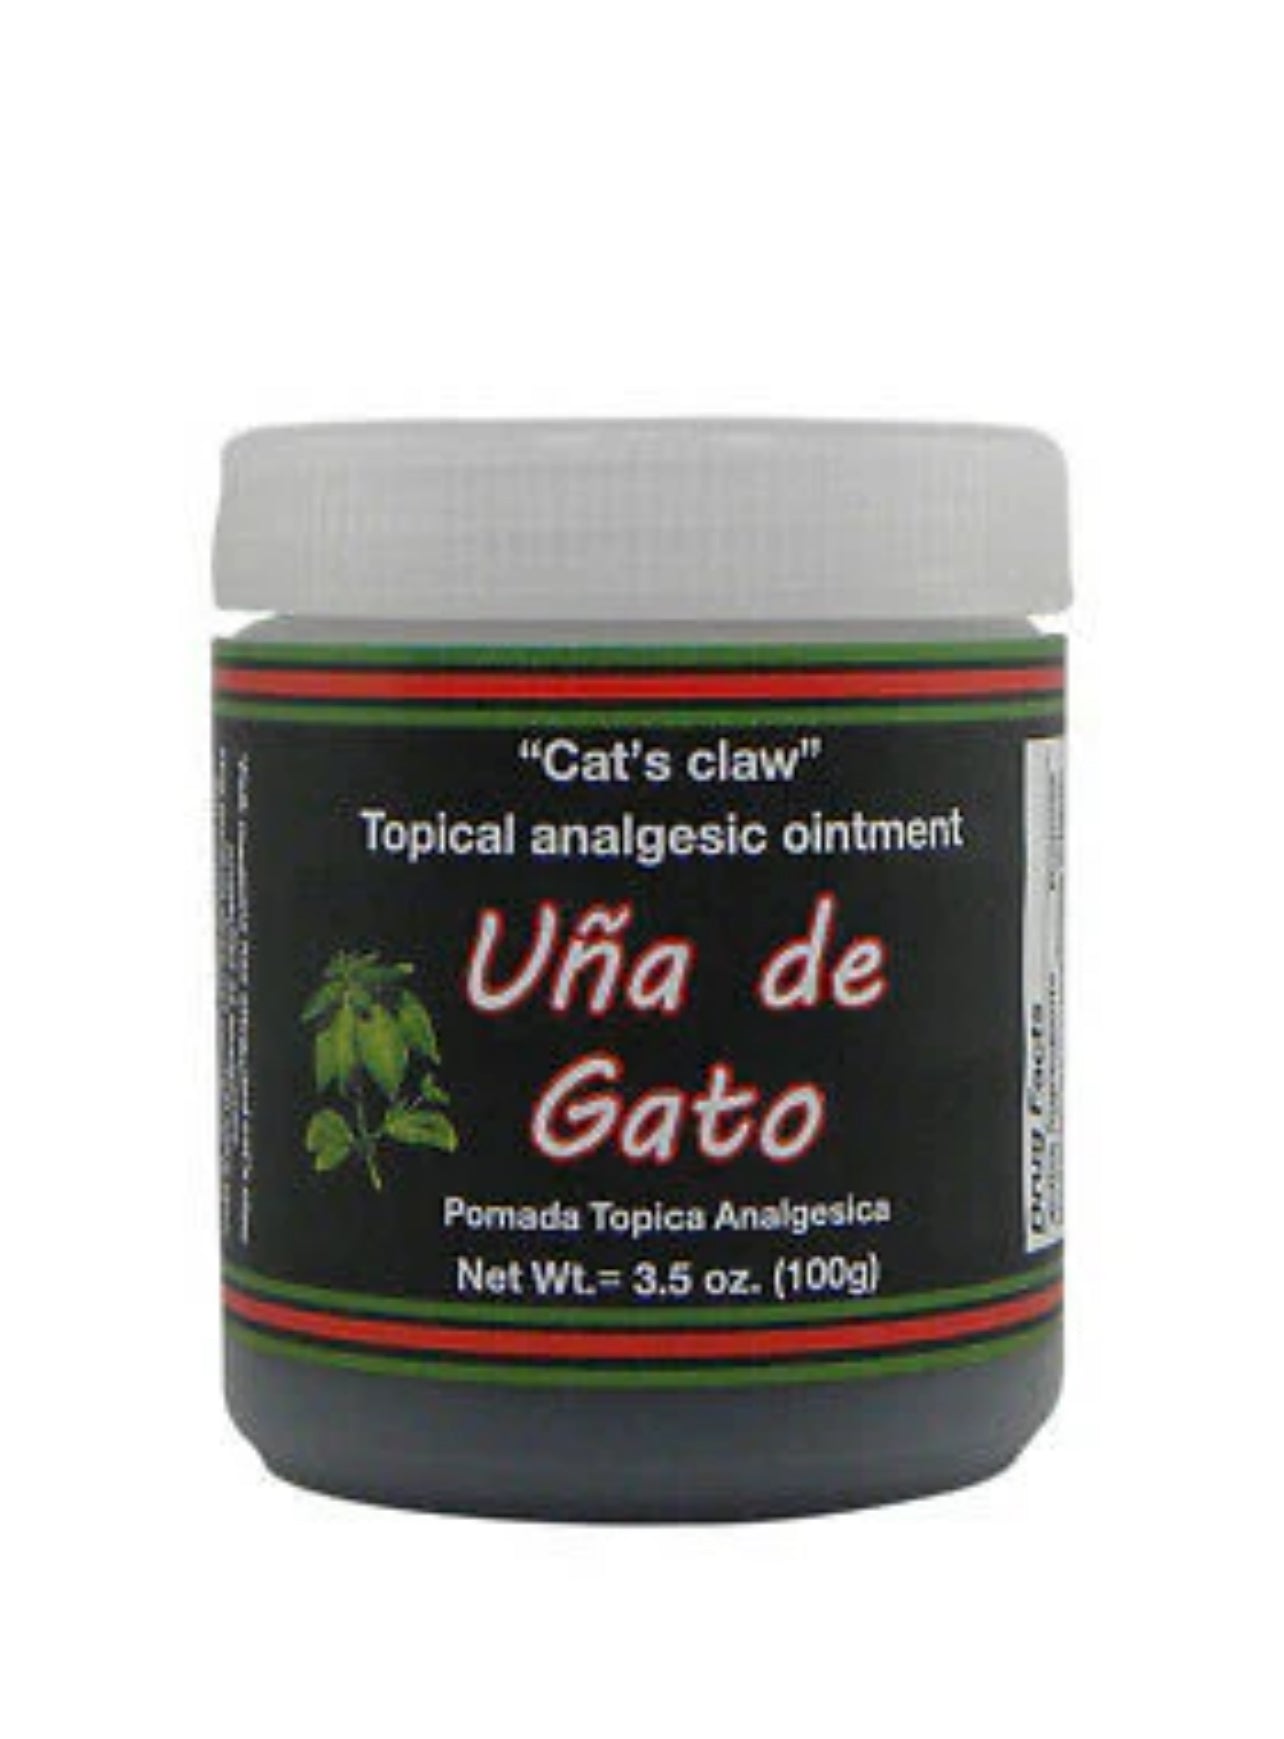 Cat's Claw Topical Analgesic Ointment "Uña de Gato"